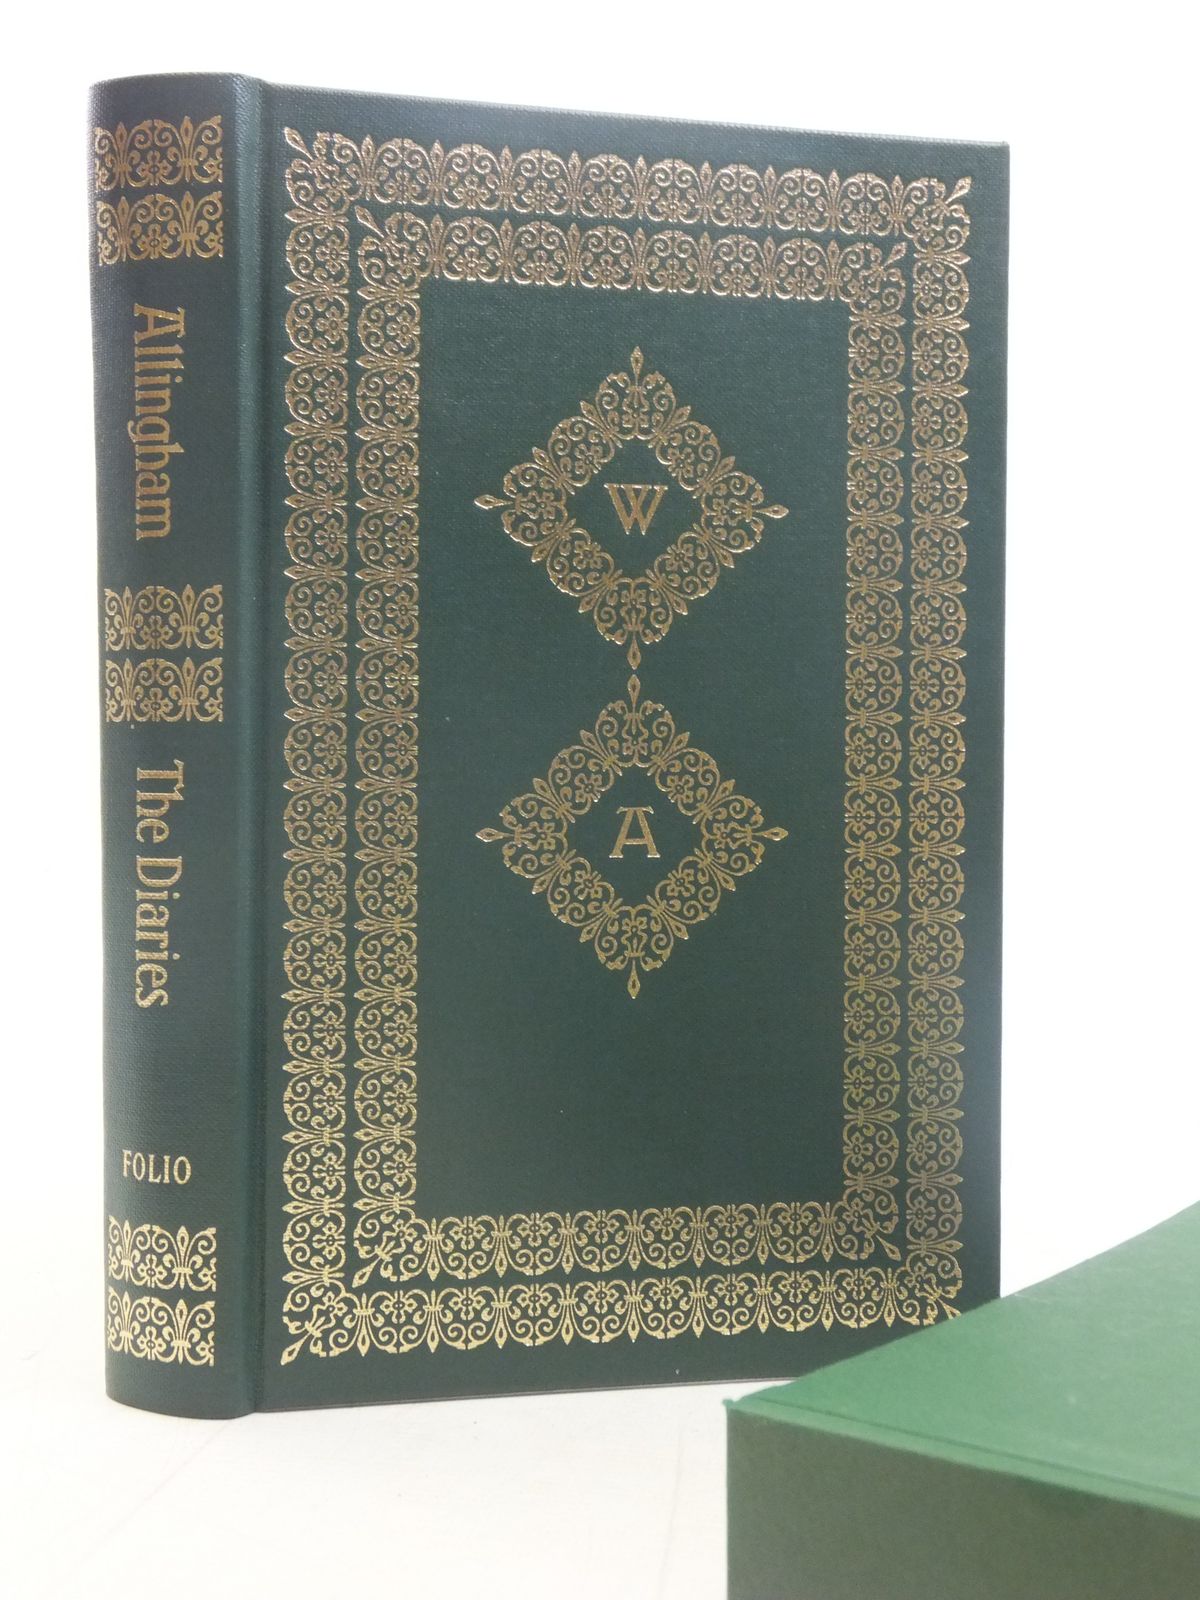 Photo of THE DIARIES written by Allingham, William published by Folio Society (STOCK CODE: 1607190)  for sale by Stella & Rose's Books